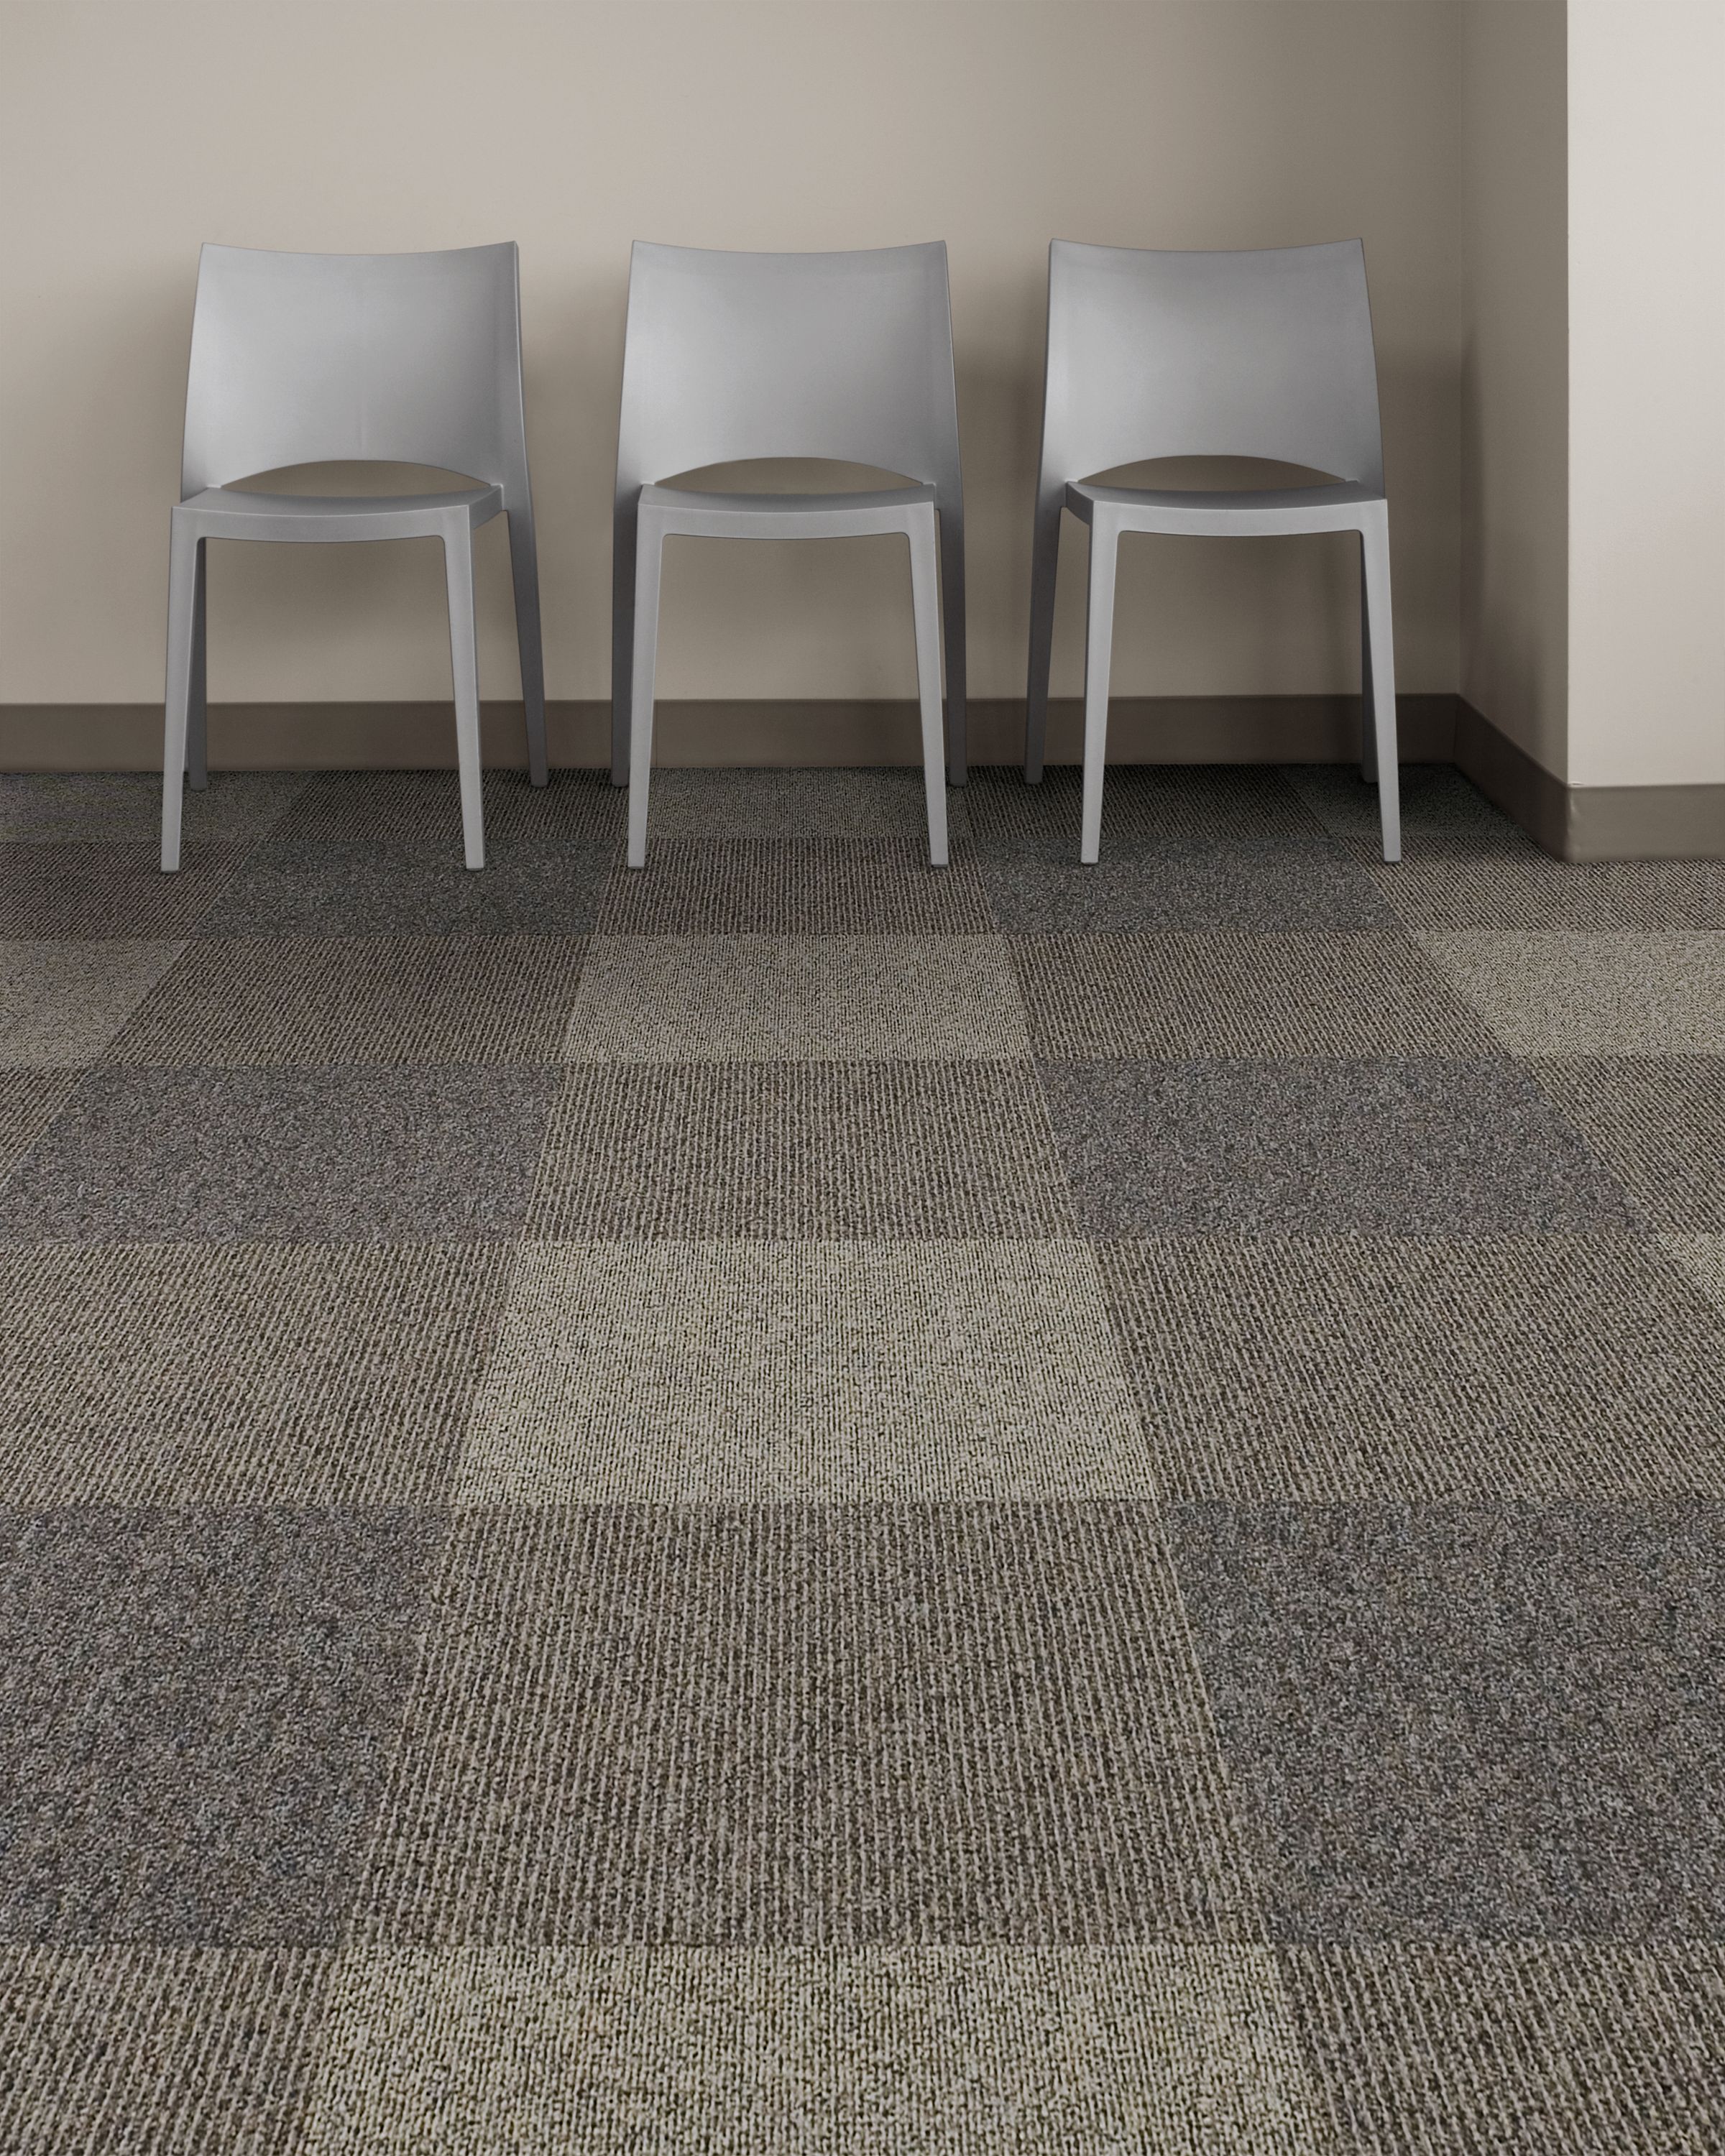 Interface Broomed, Grooved and Brushed carpet tile in room with three chairs image number 4